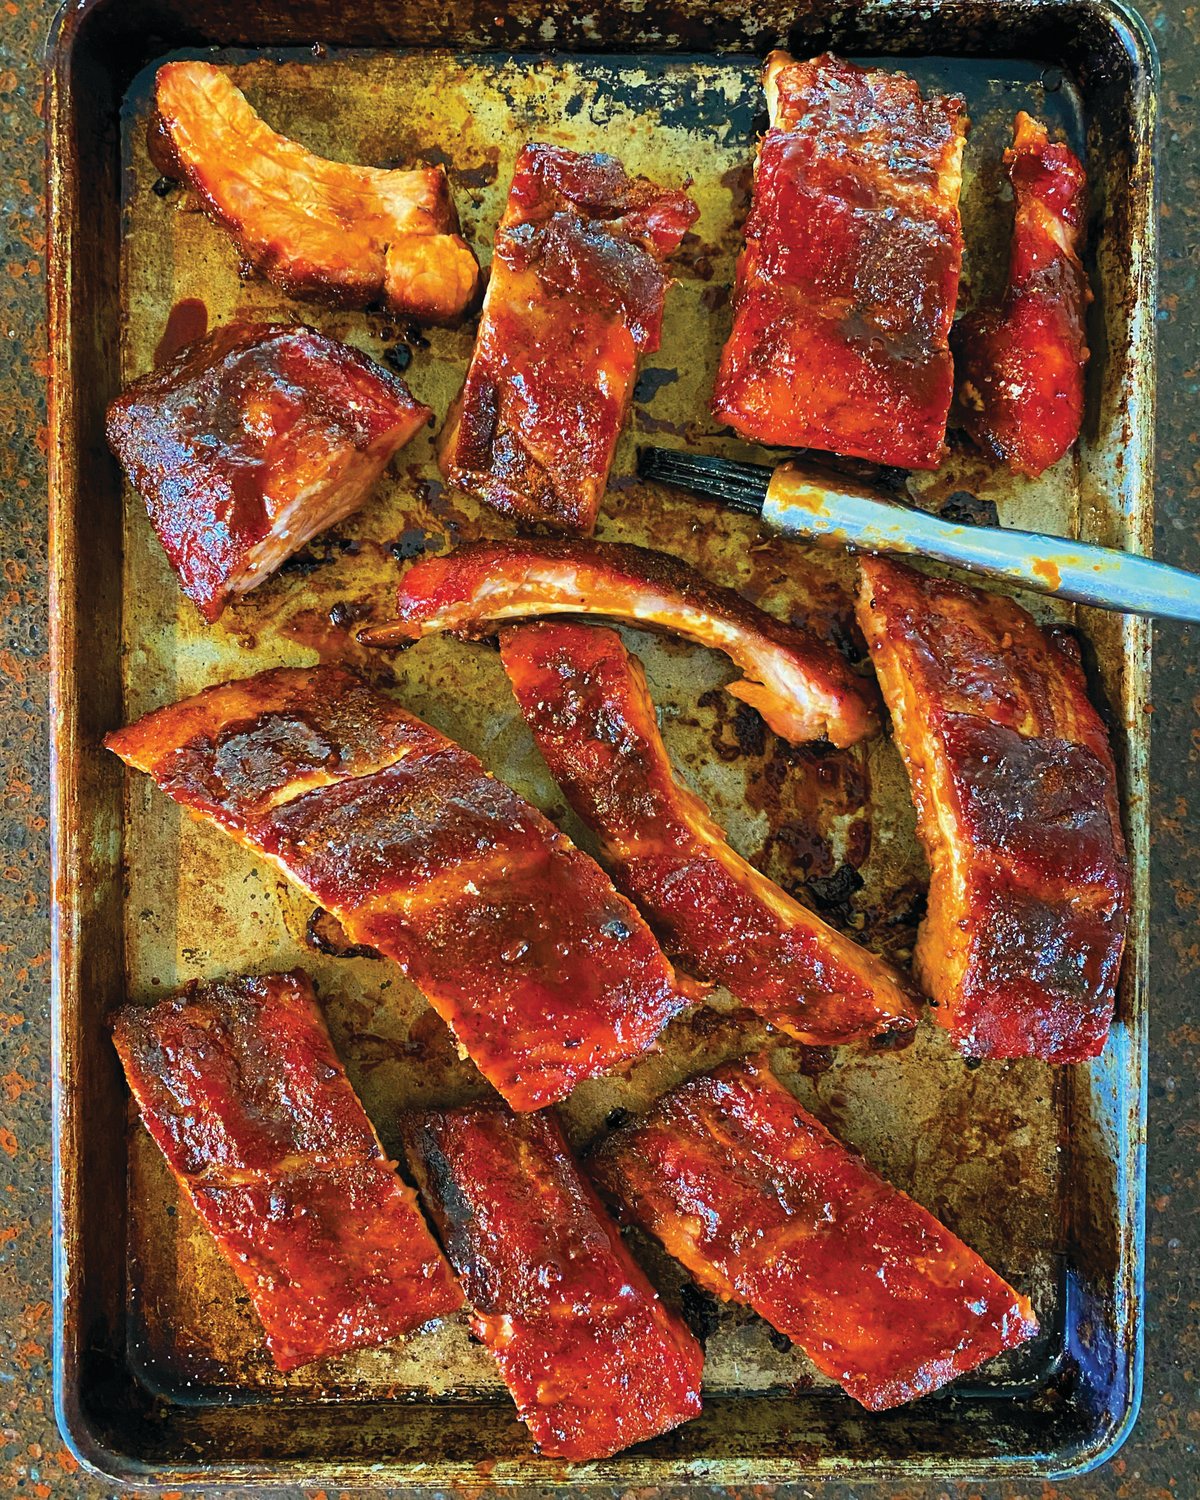 Nothing says summer more than a platter of ribs hot off the grill. Experts say the key to good barbecue is the sauce.